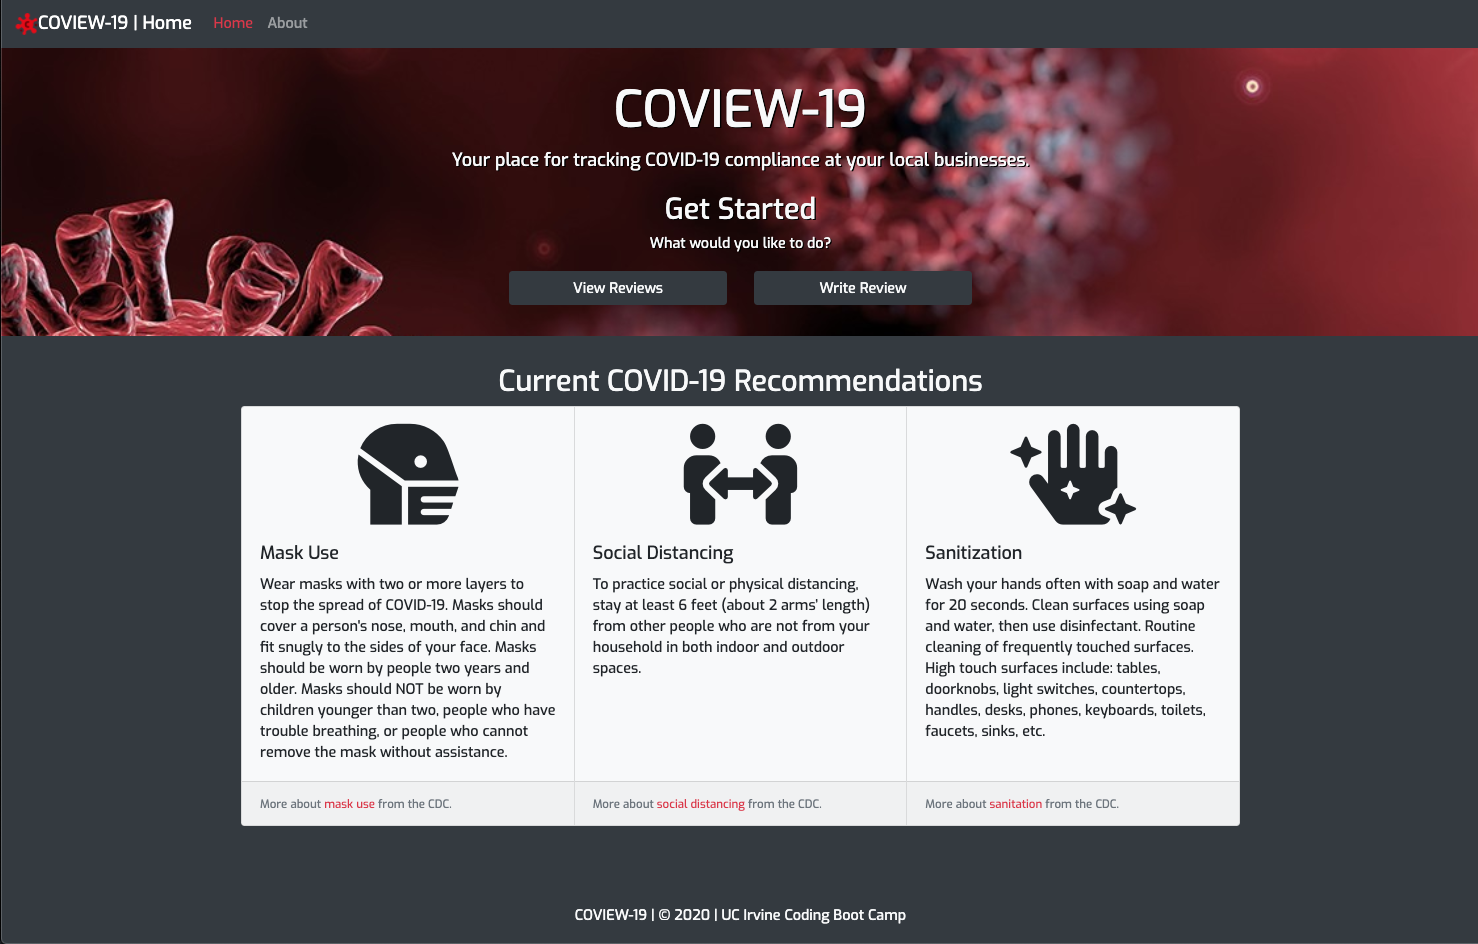 COVIEW-19